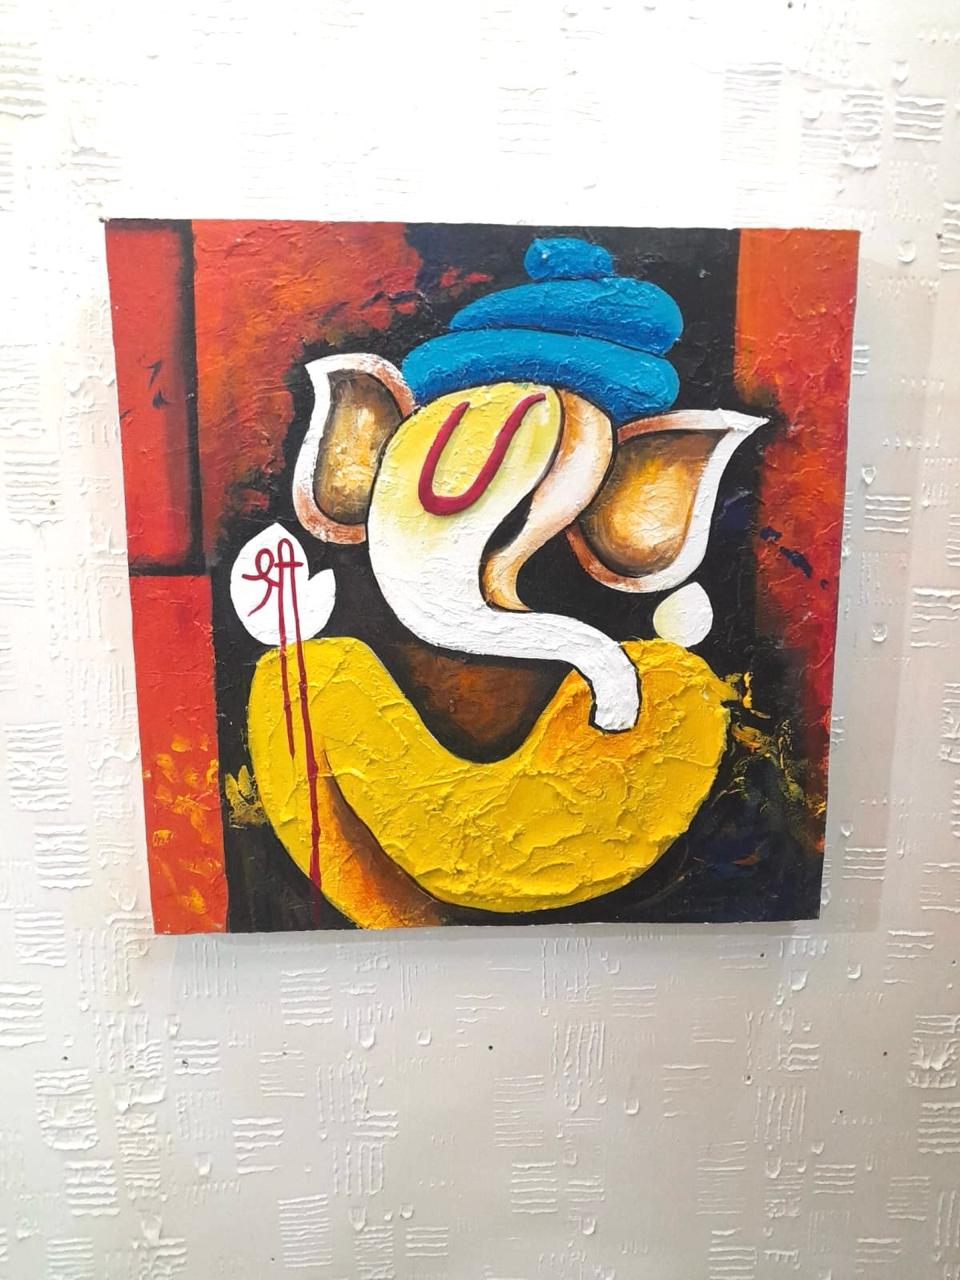 Ganesh Canvas Painting In Various Designs Artwork Spiritual Collection By Tamrapatra